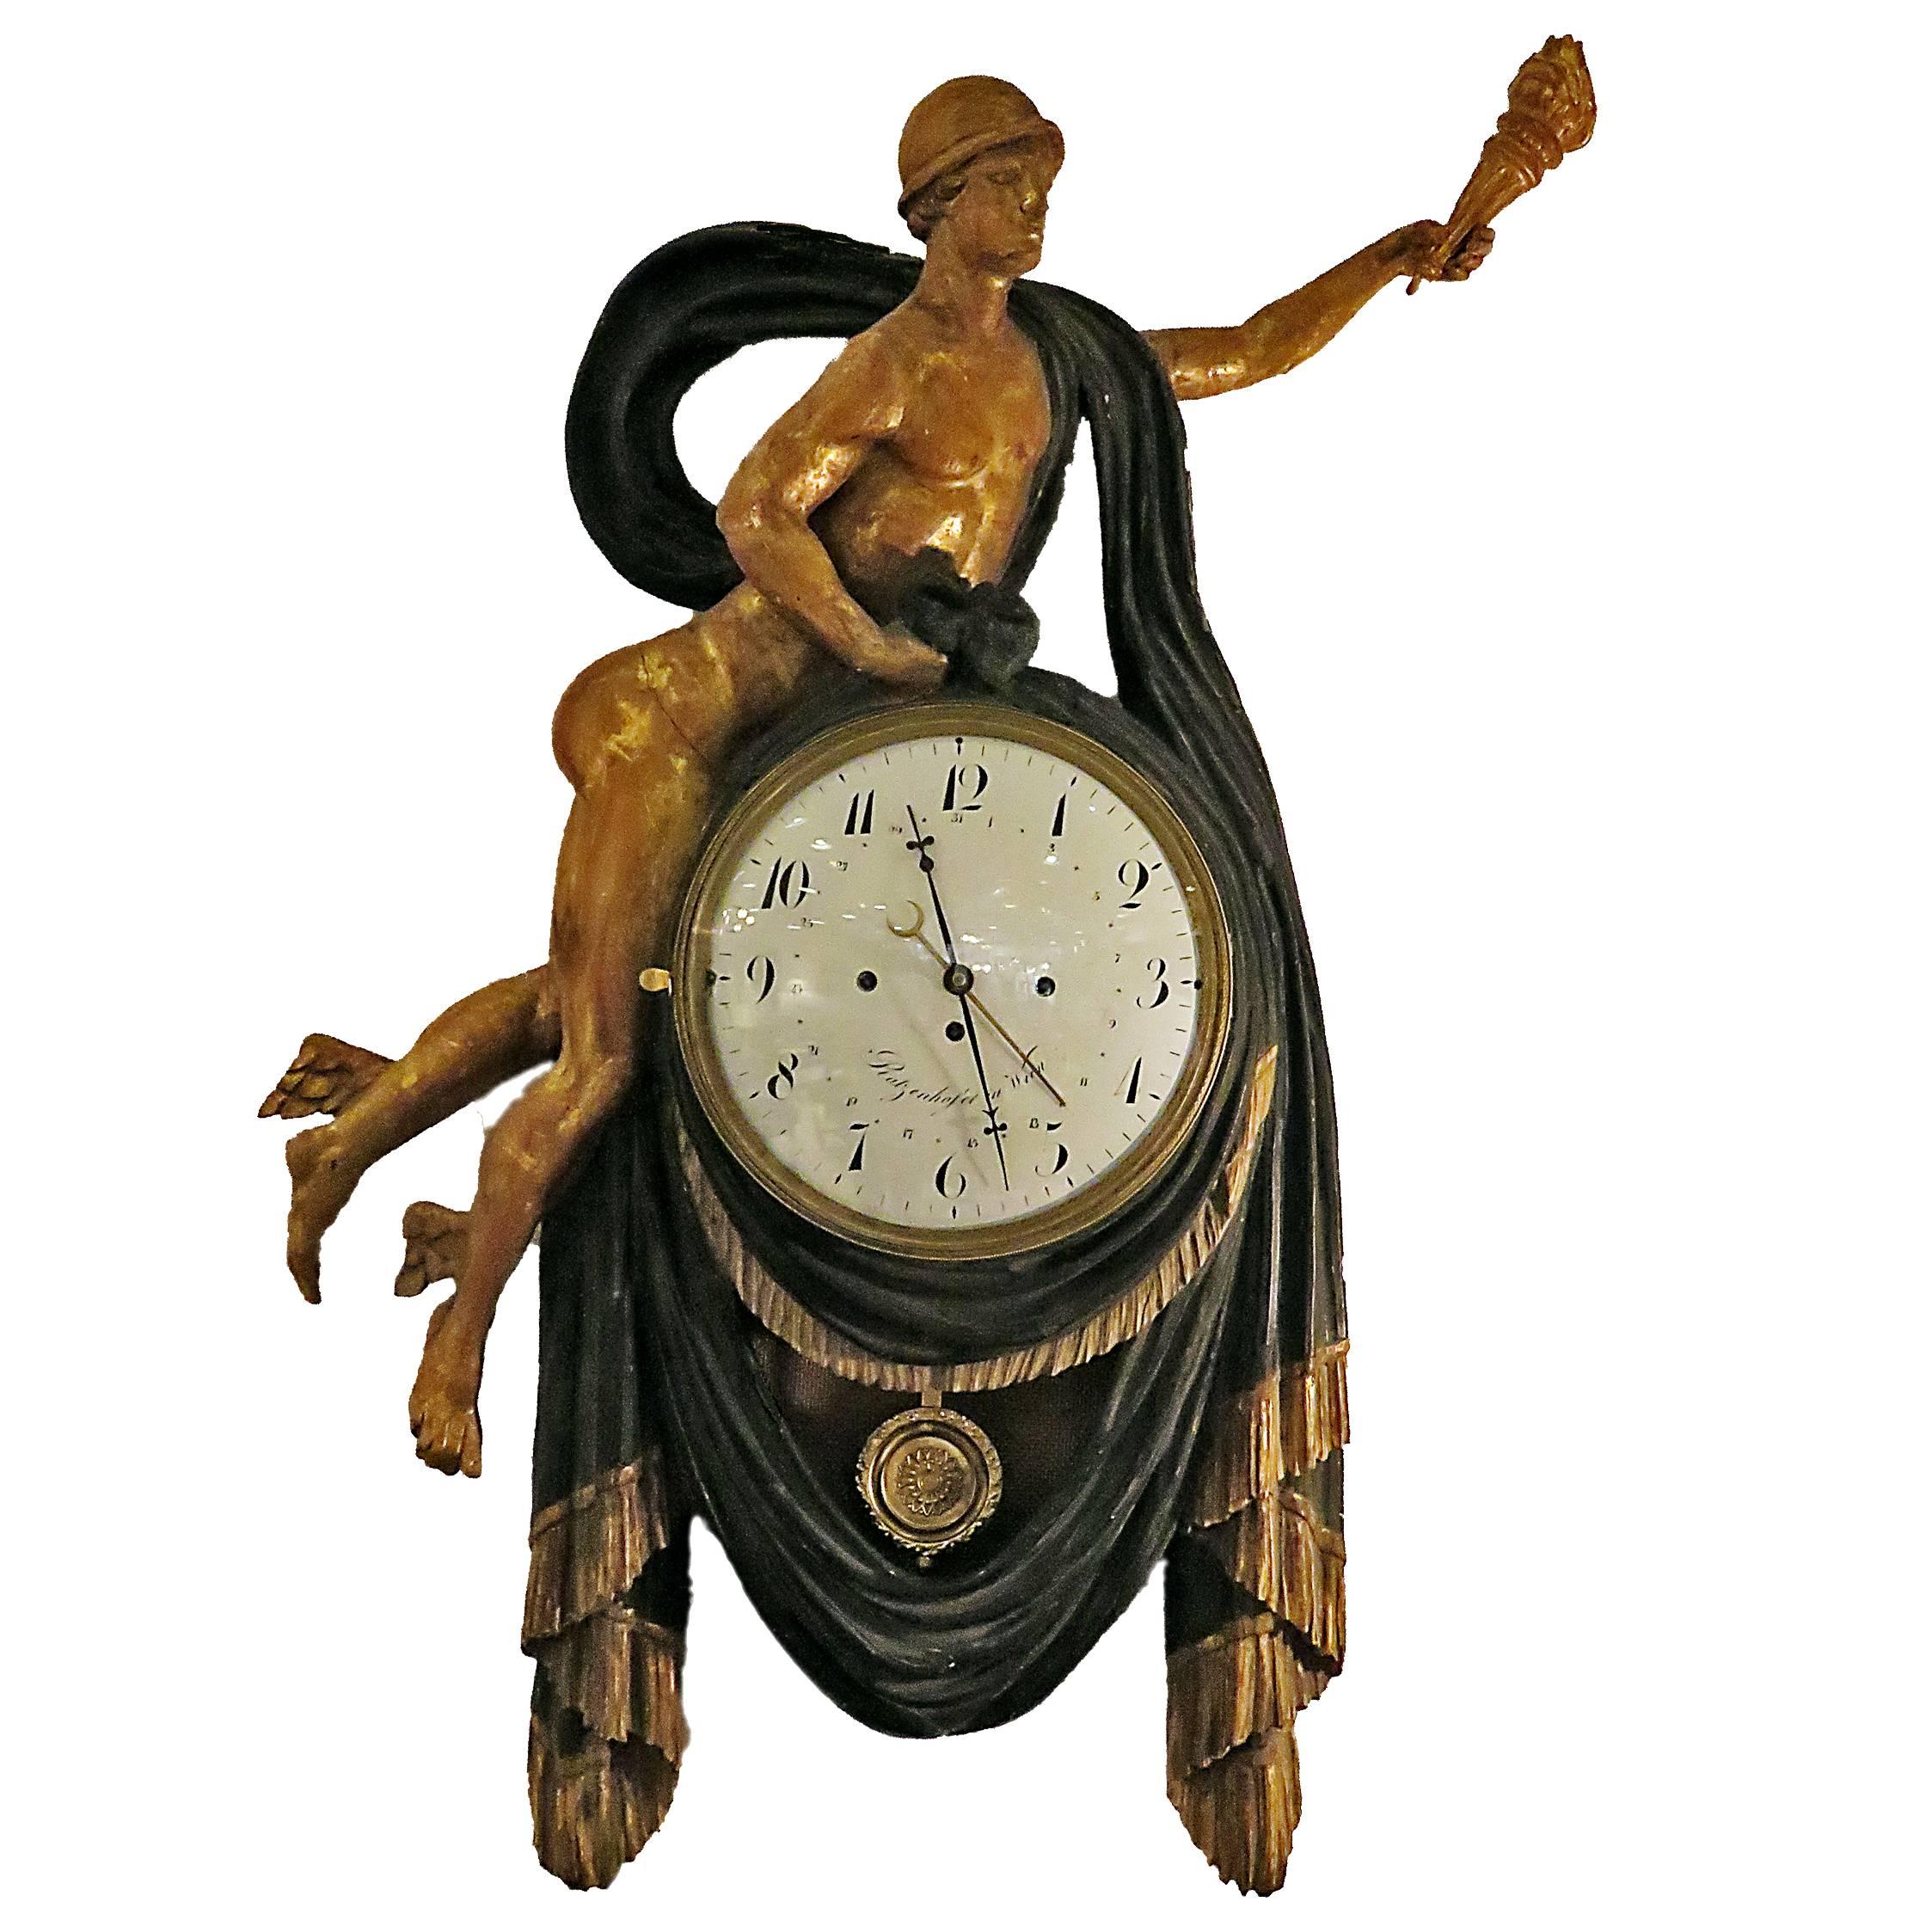 Hermes painted and gilt clock Vienna c.1820